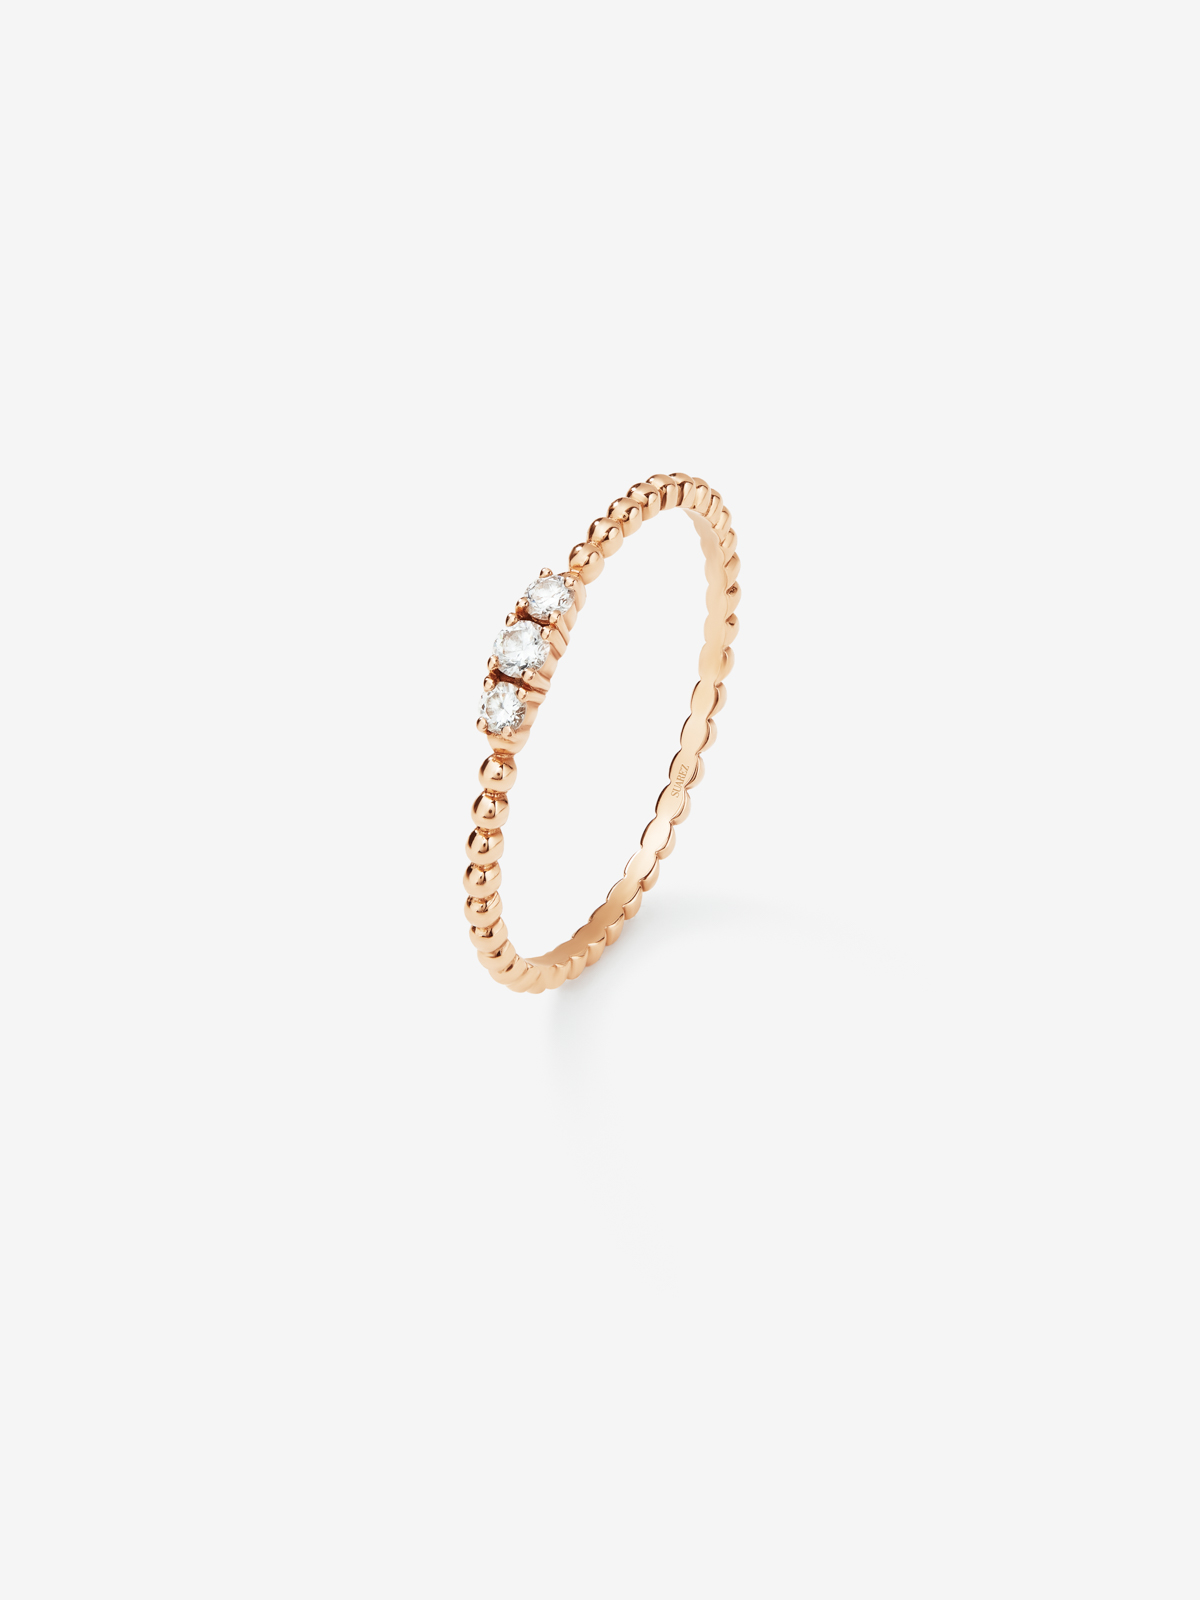 Three-band ring with 18K rose gold beads with diamonds